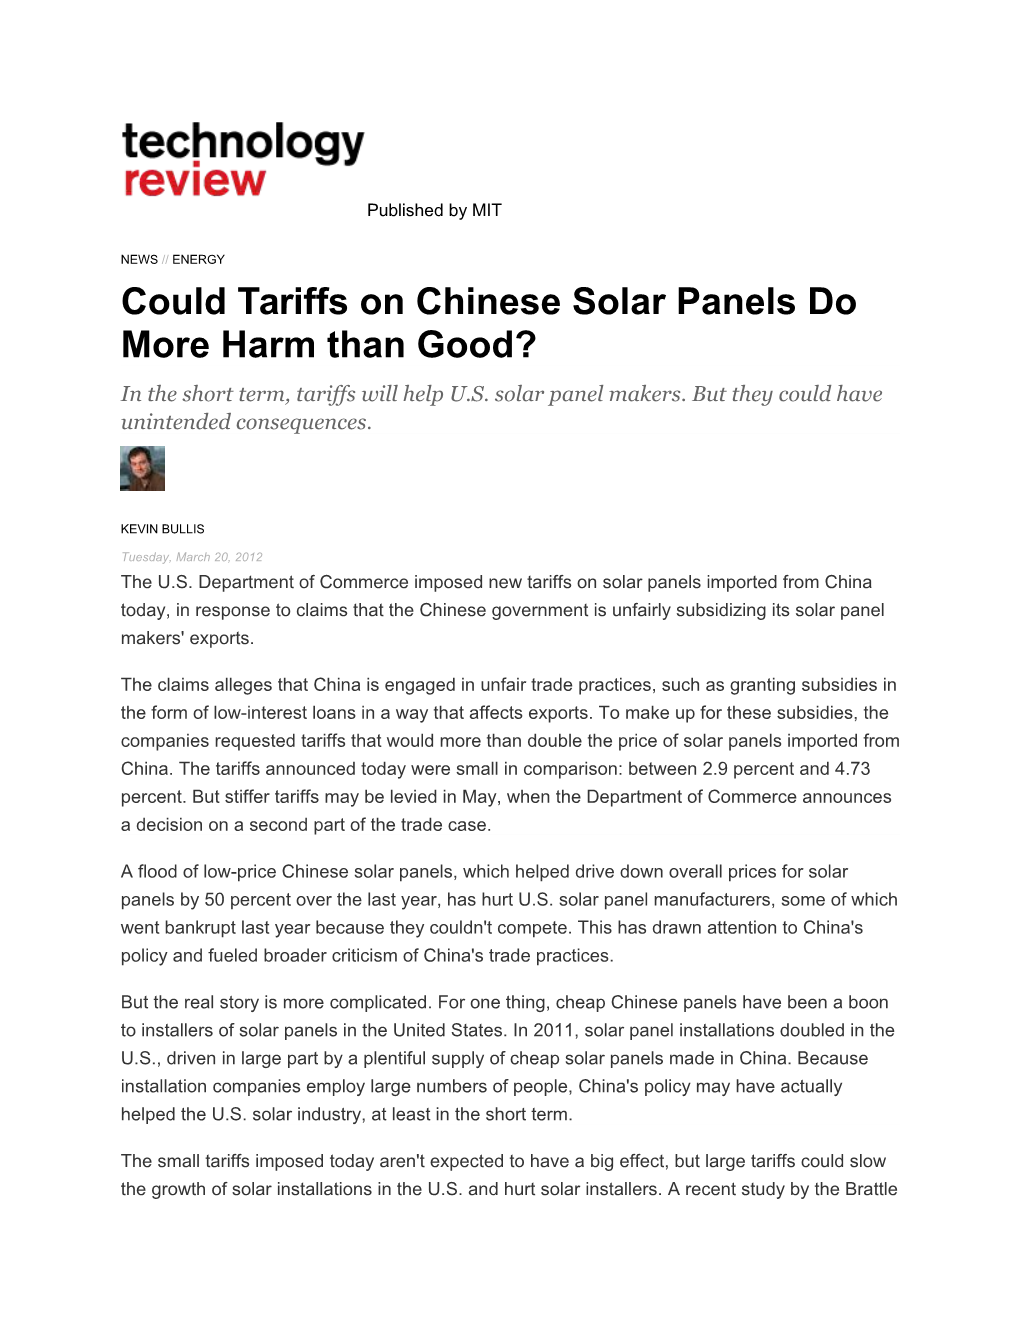 Could Tariffs on Chinese Solar Panels Do More Harm Than Good?